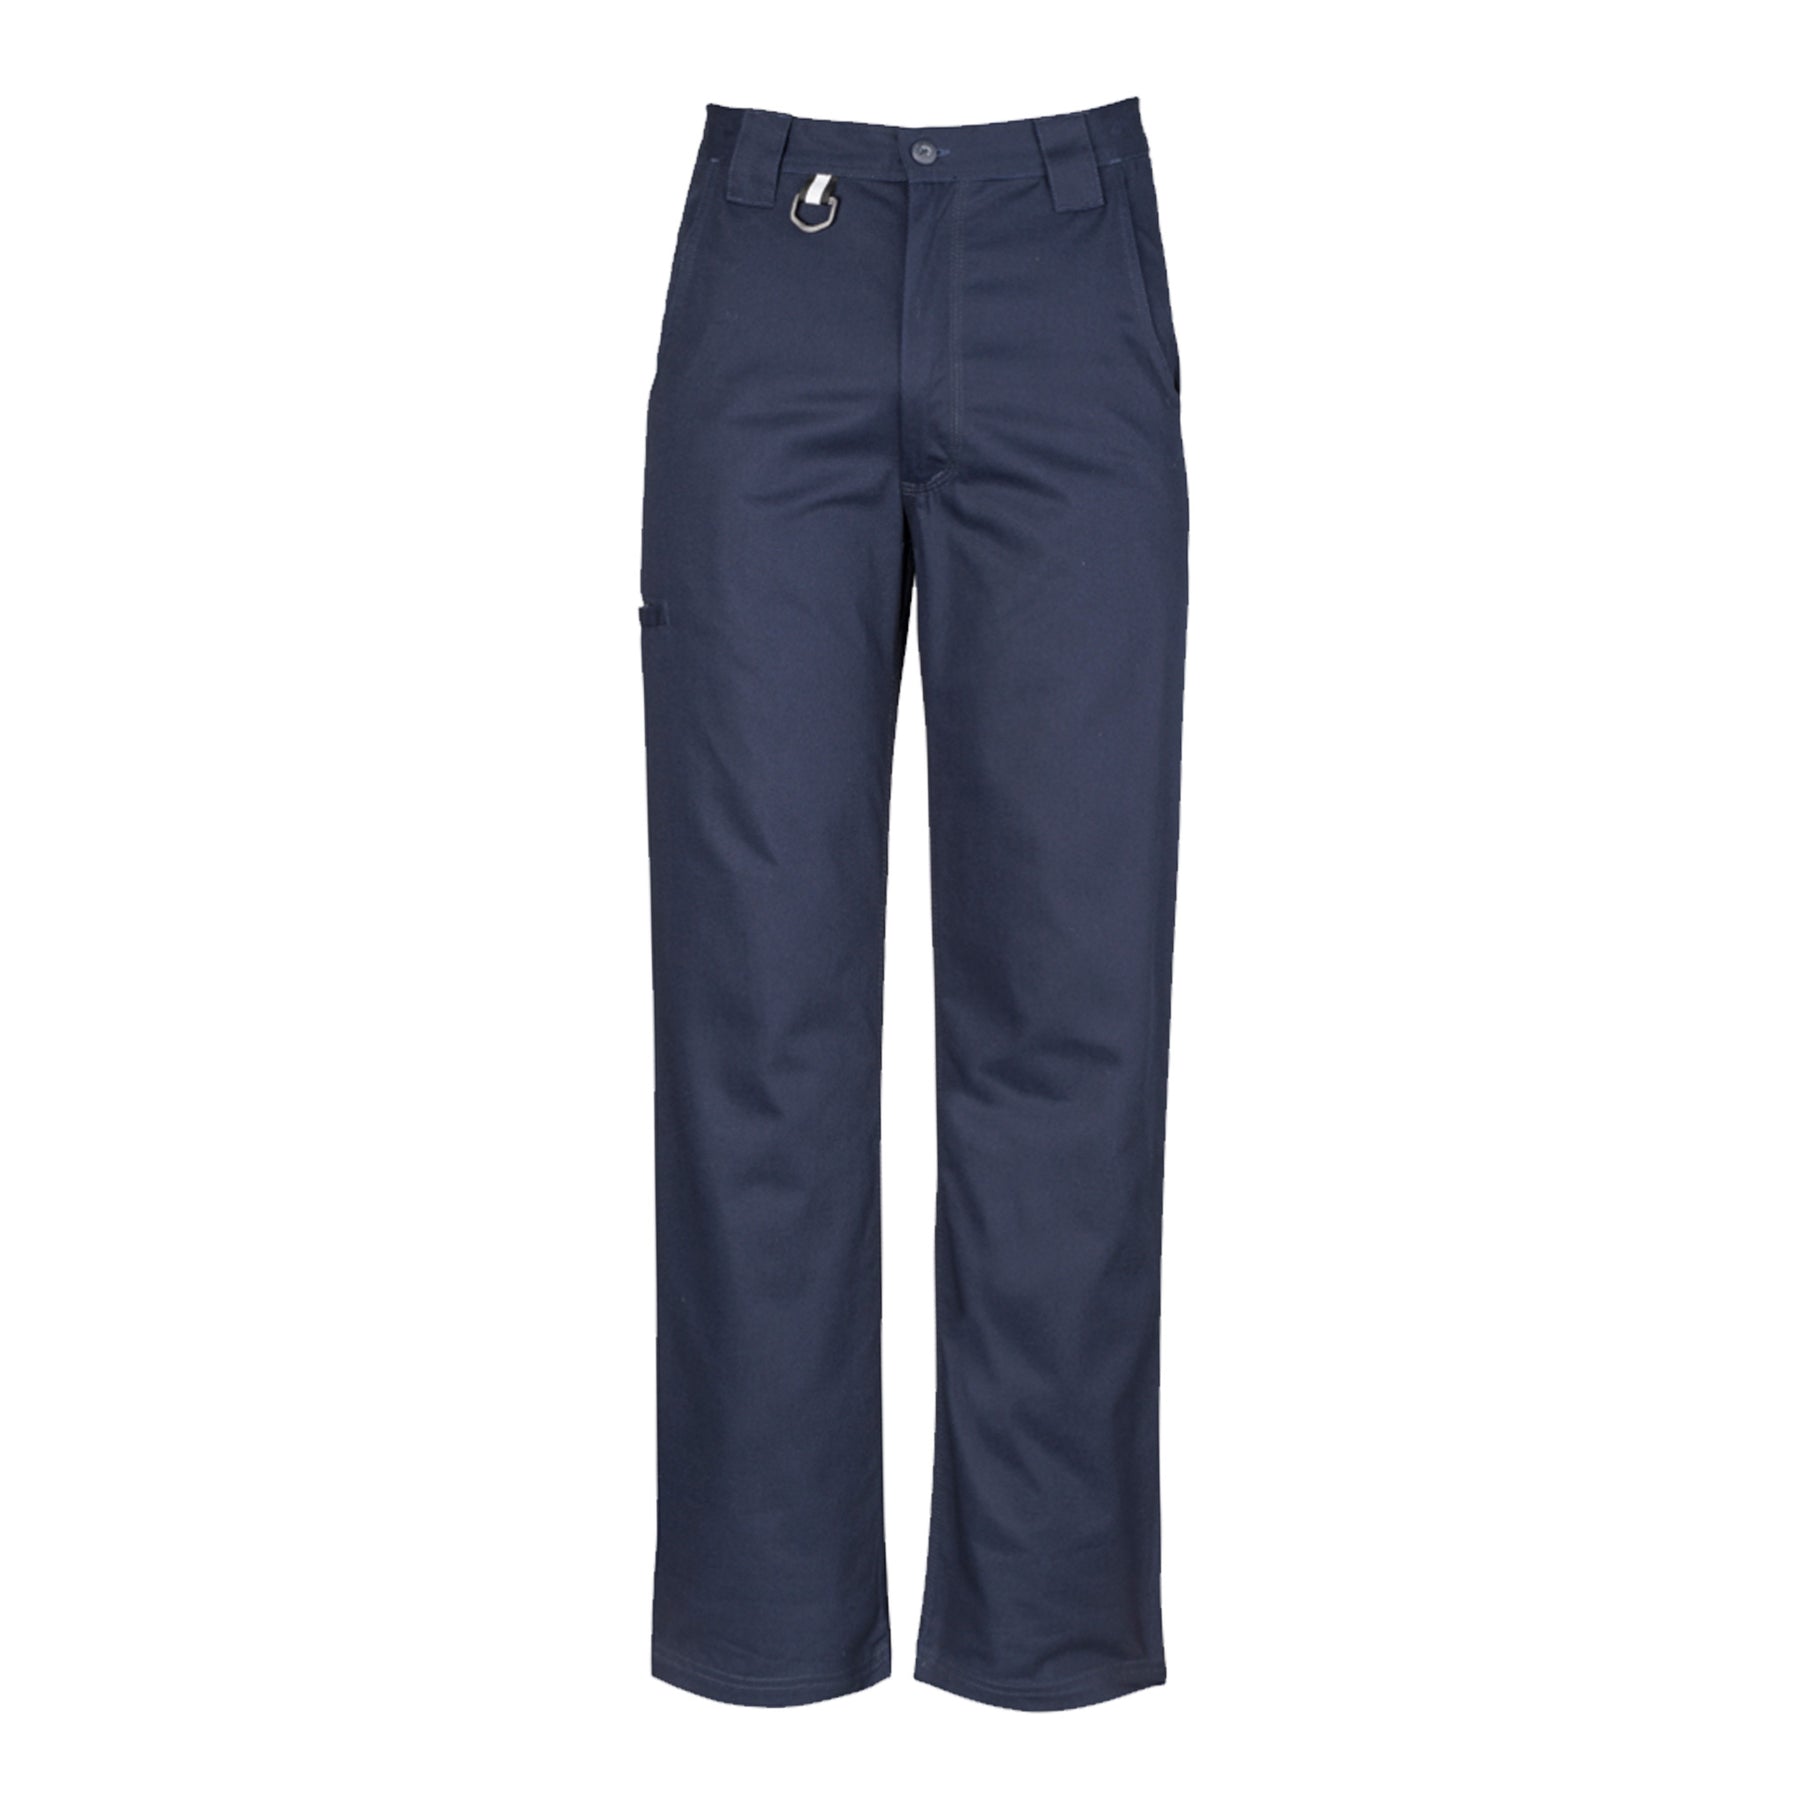 plain utility pant in navy